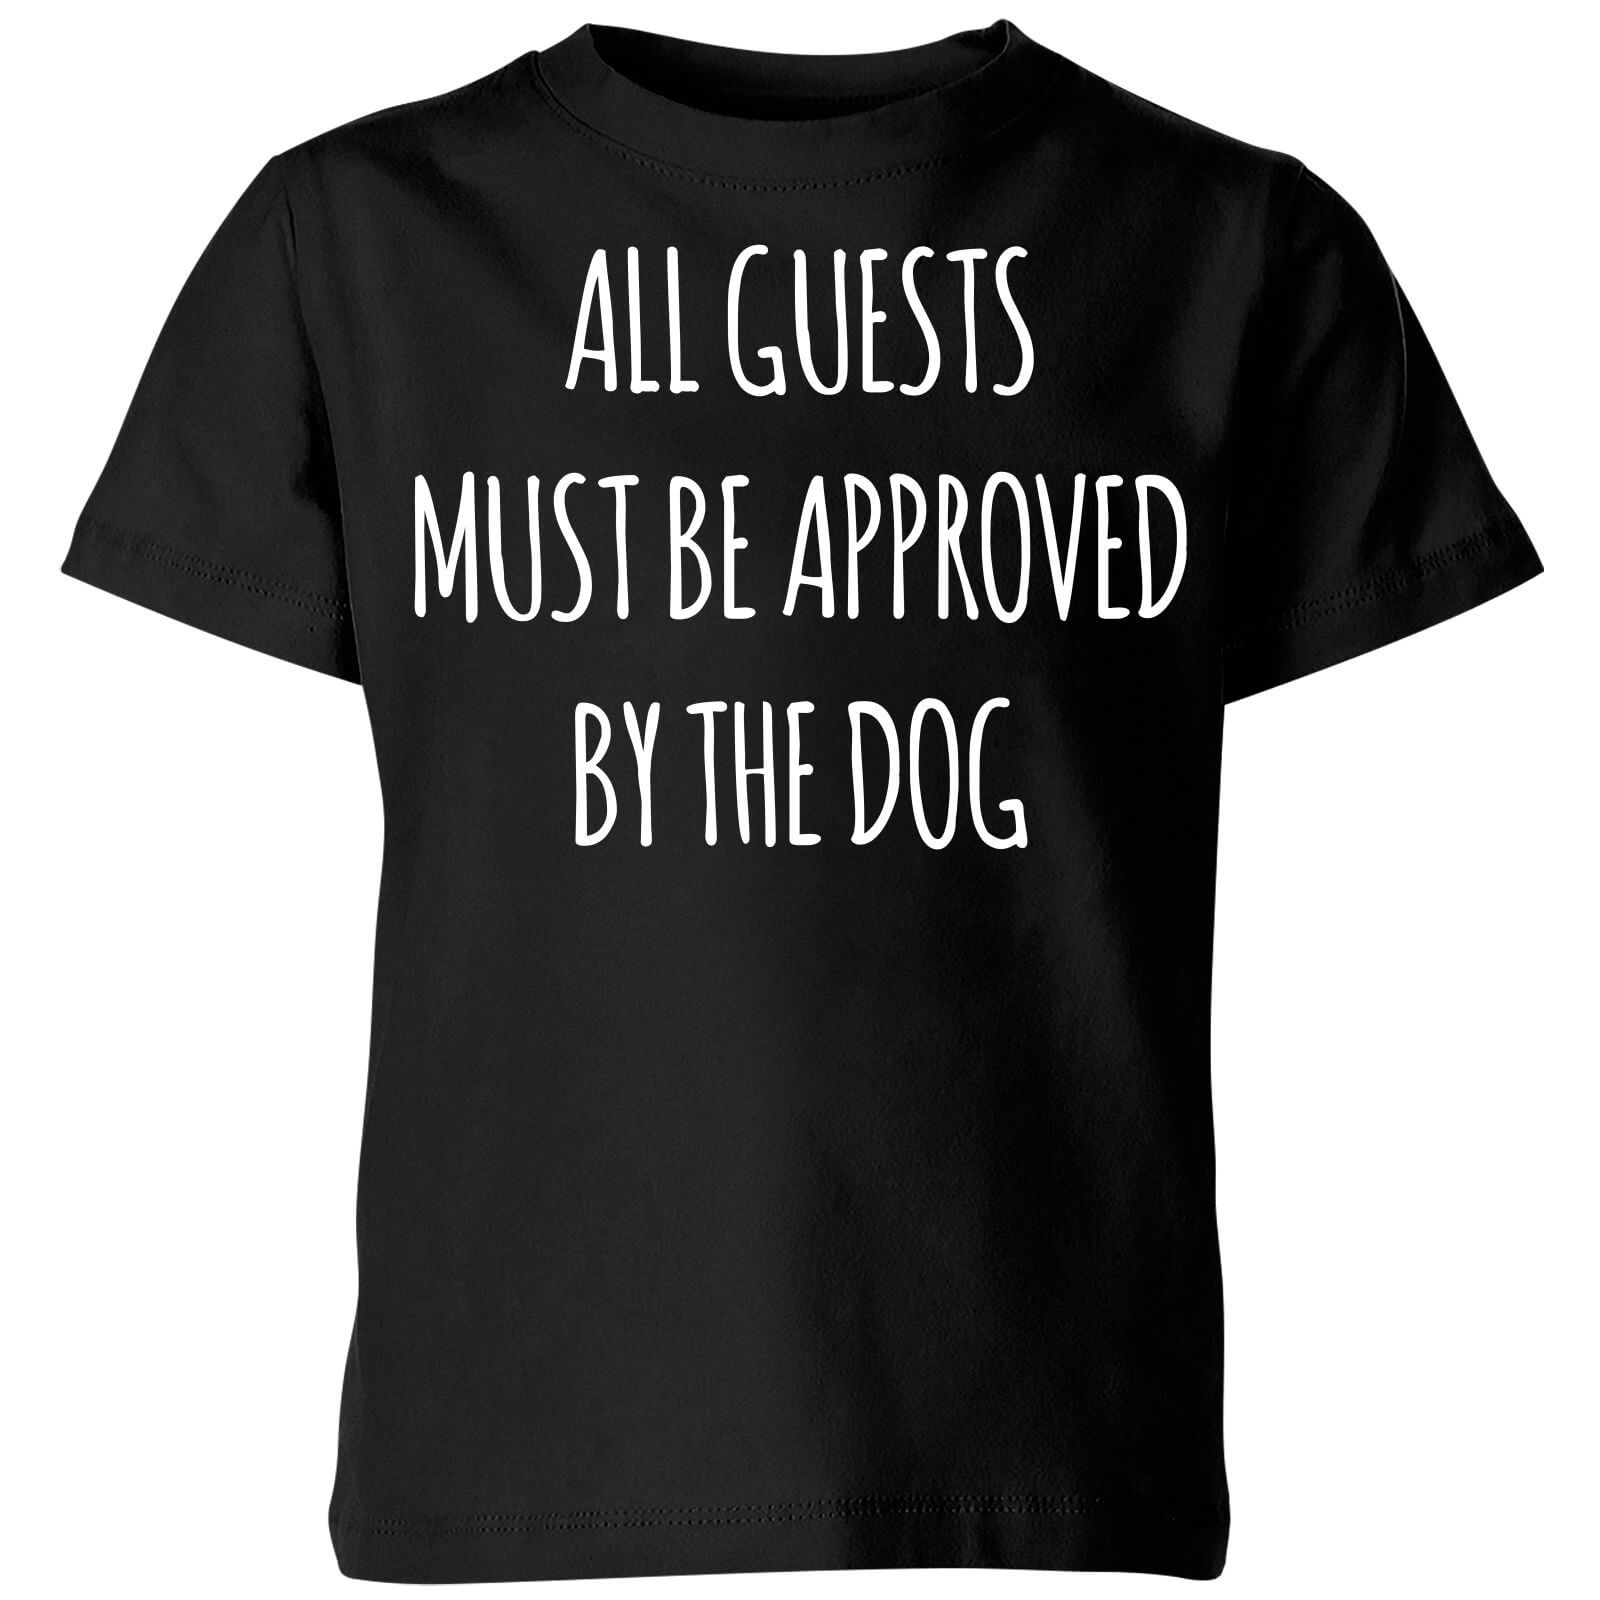 All Guests Must Be Approved By The Dog Kids' T-Shirt - Black - 3-4 Years - Black